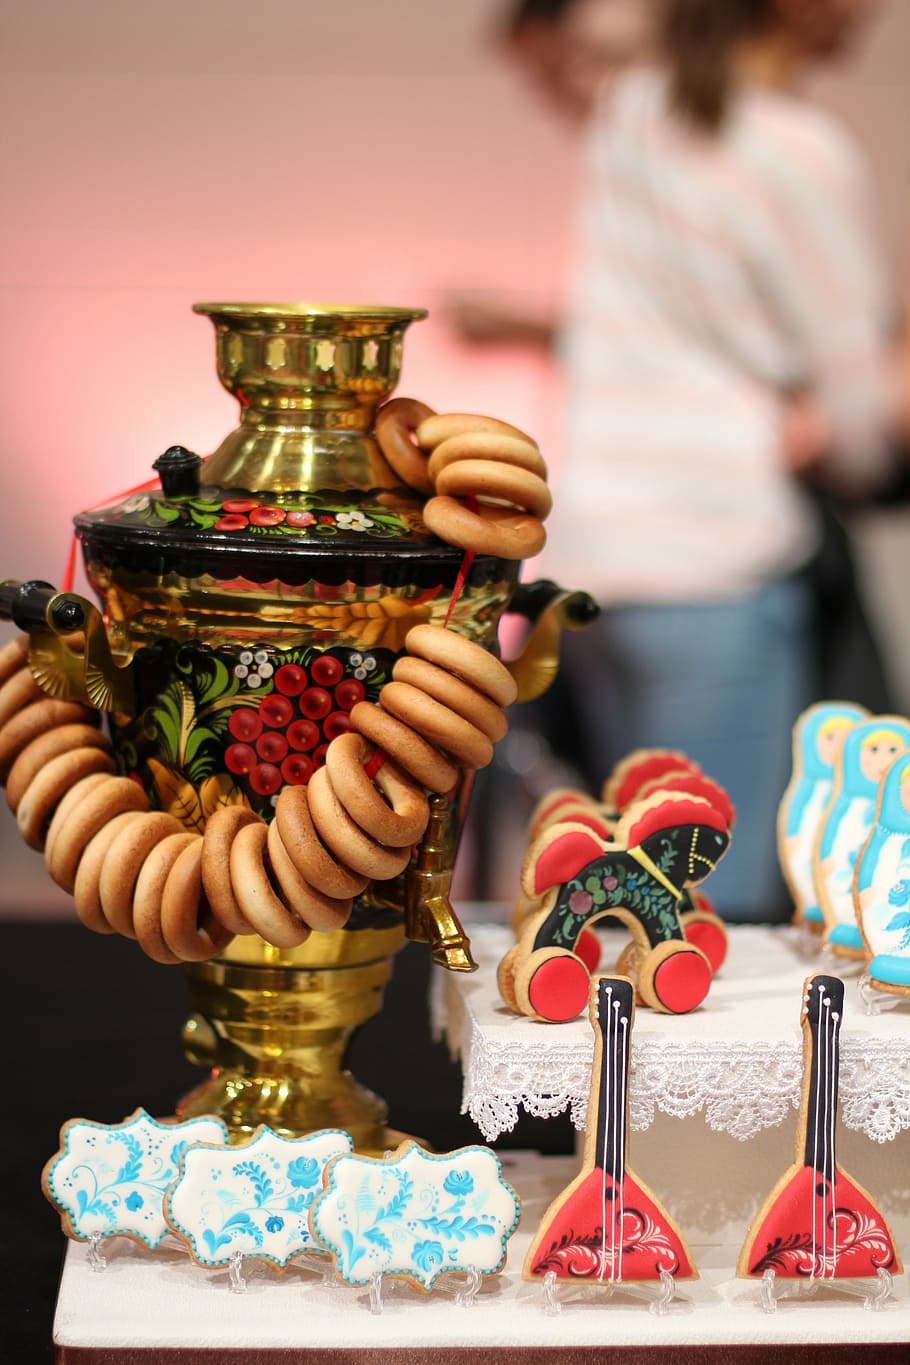 samovar, russian, decoration, cookies, cookie, cultures, real people, one person, container, focus on foreground